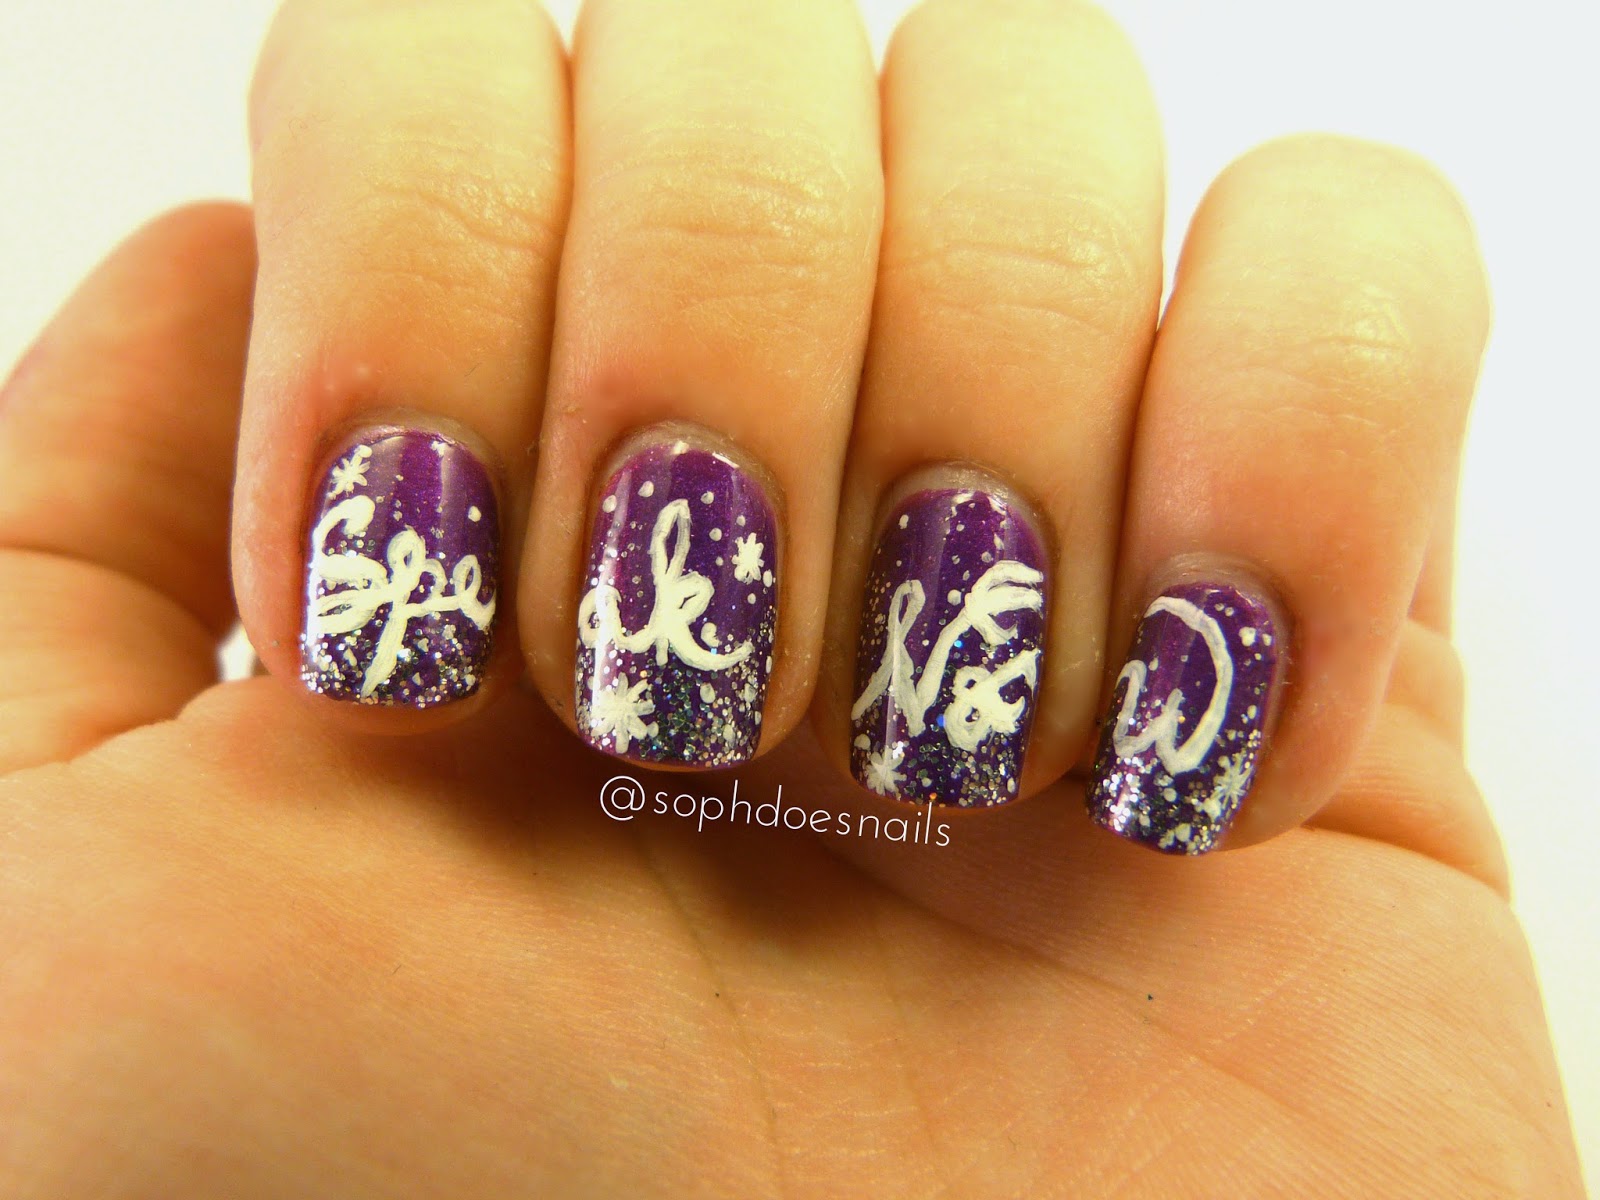 Speak Now Themed Nails - wide 7